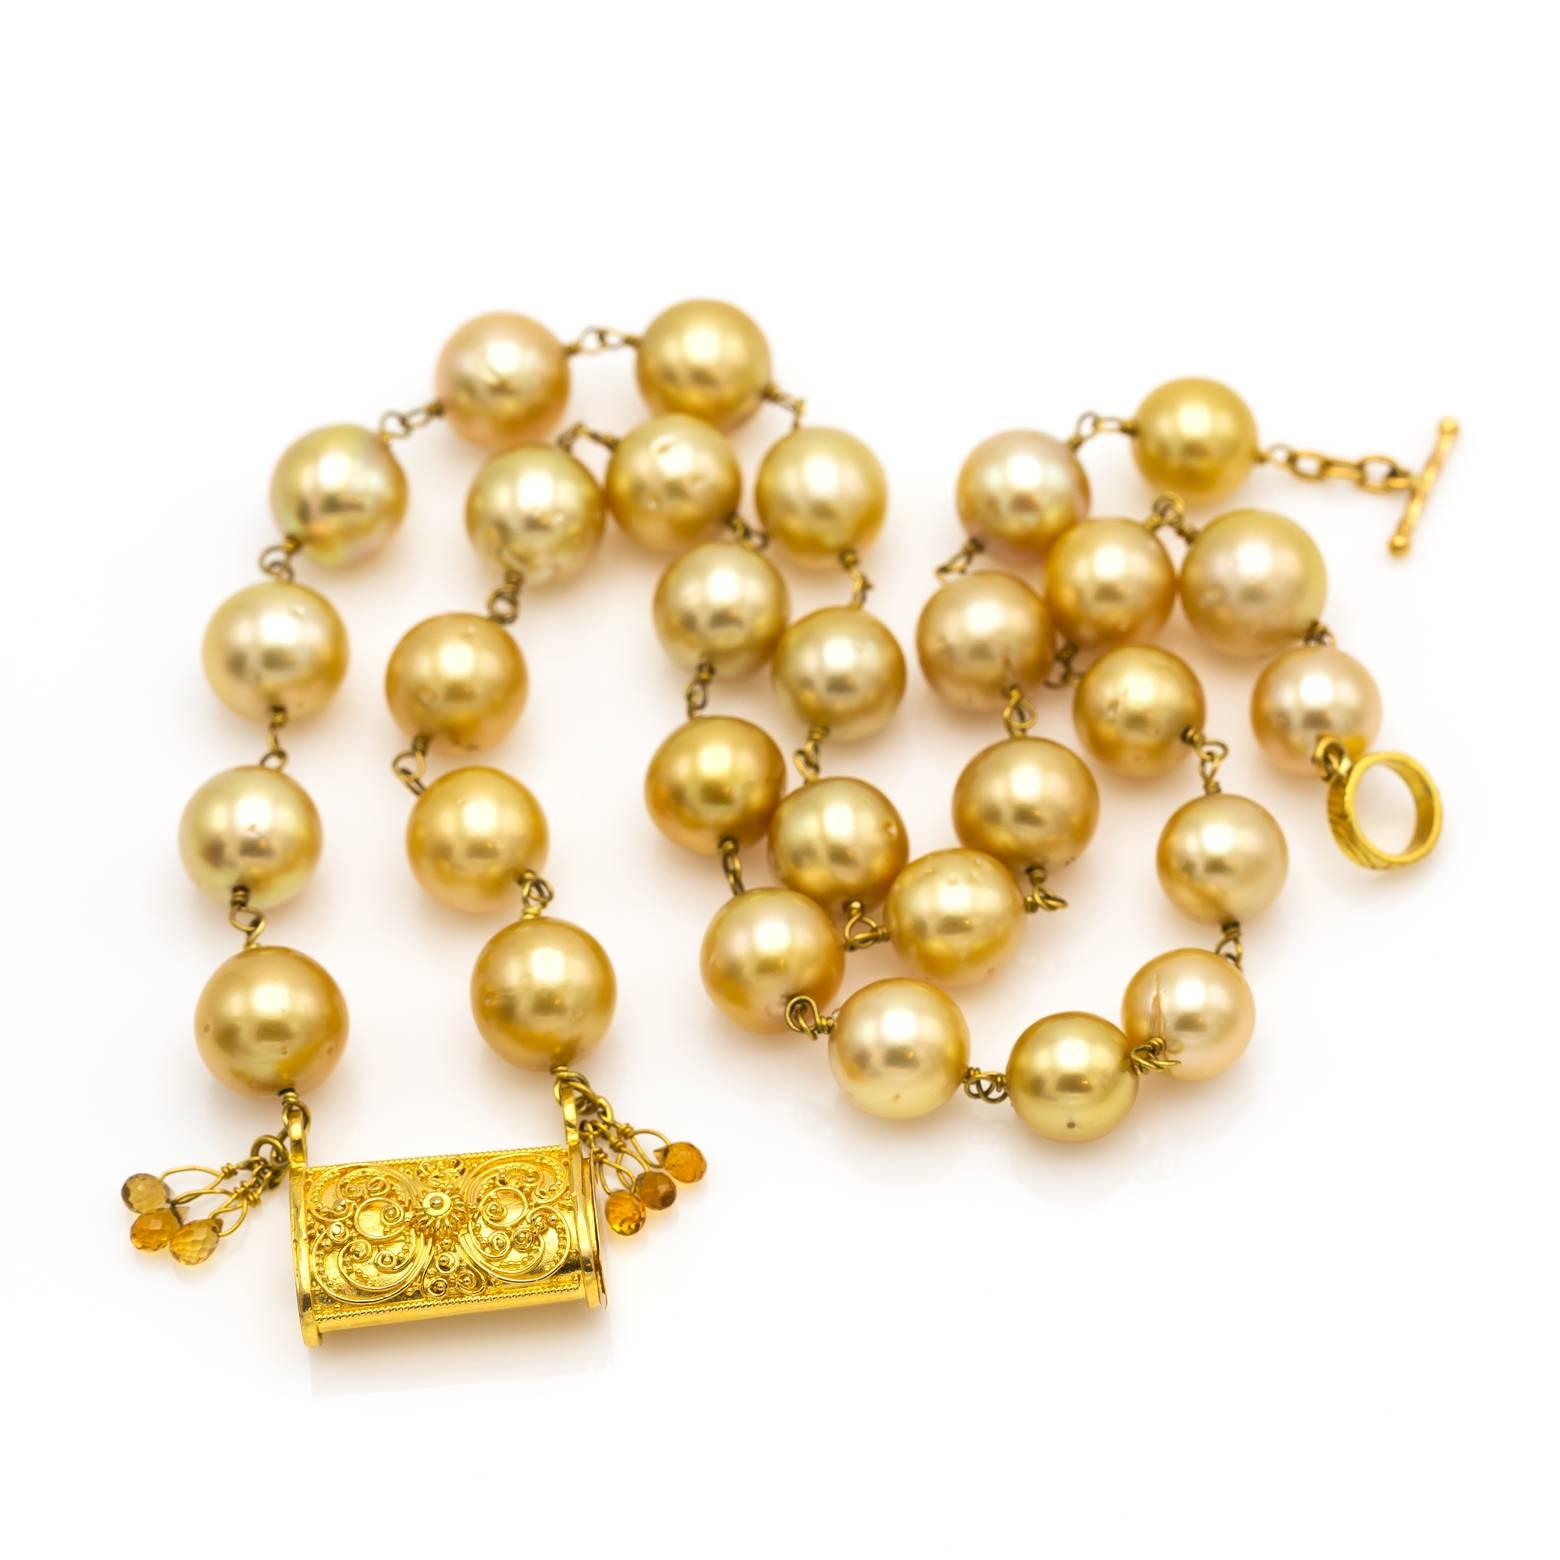 Modern Golden South Sea Pearl Necklace